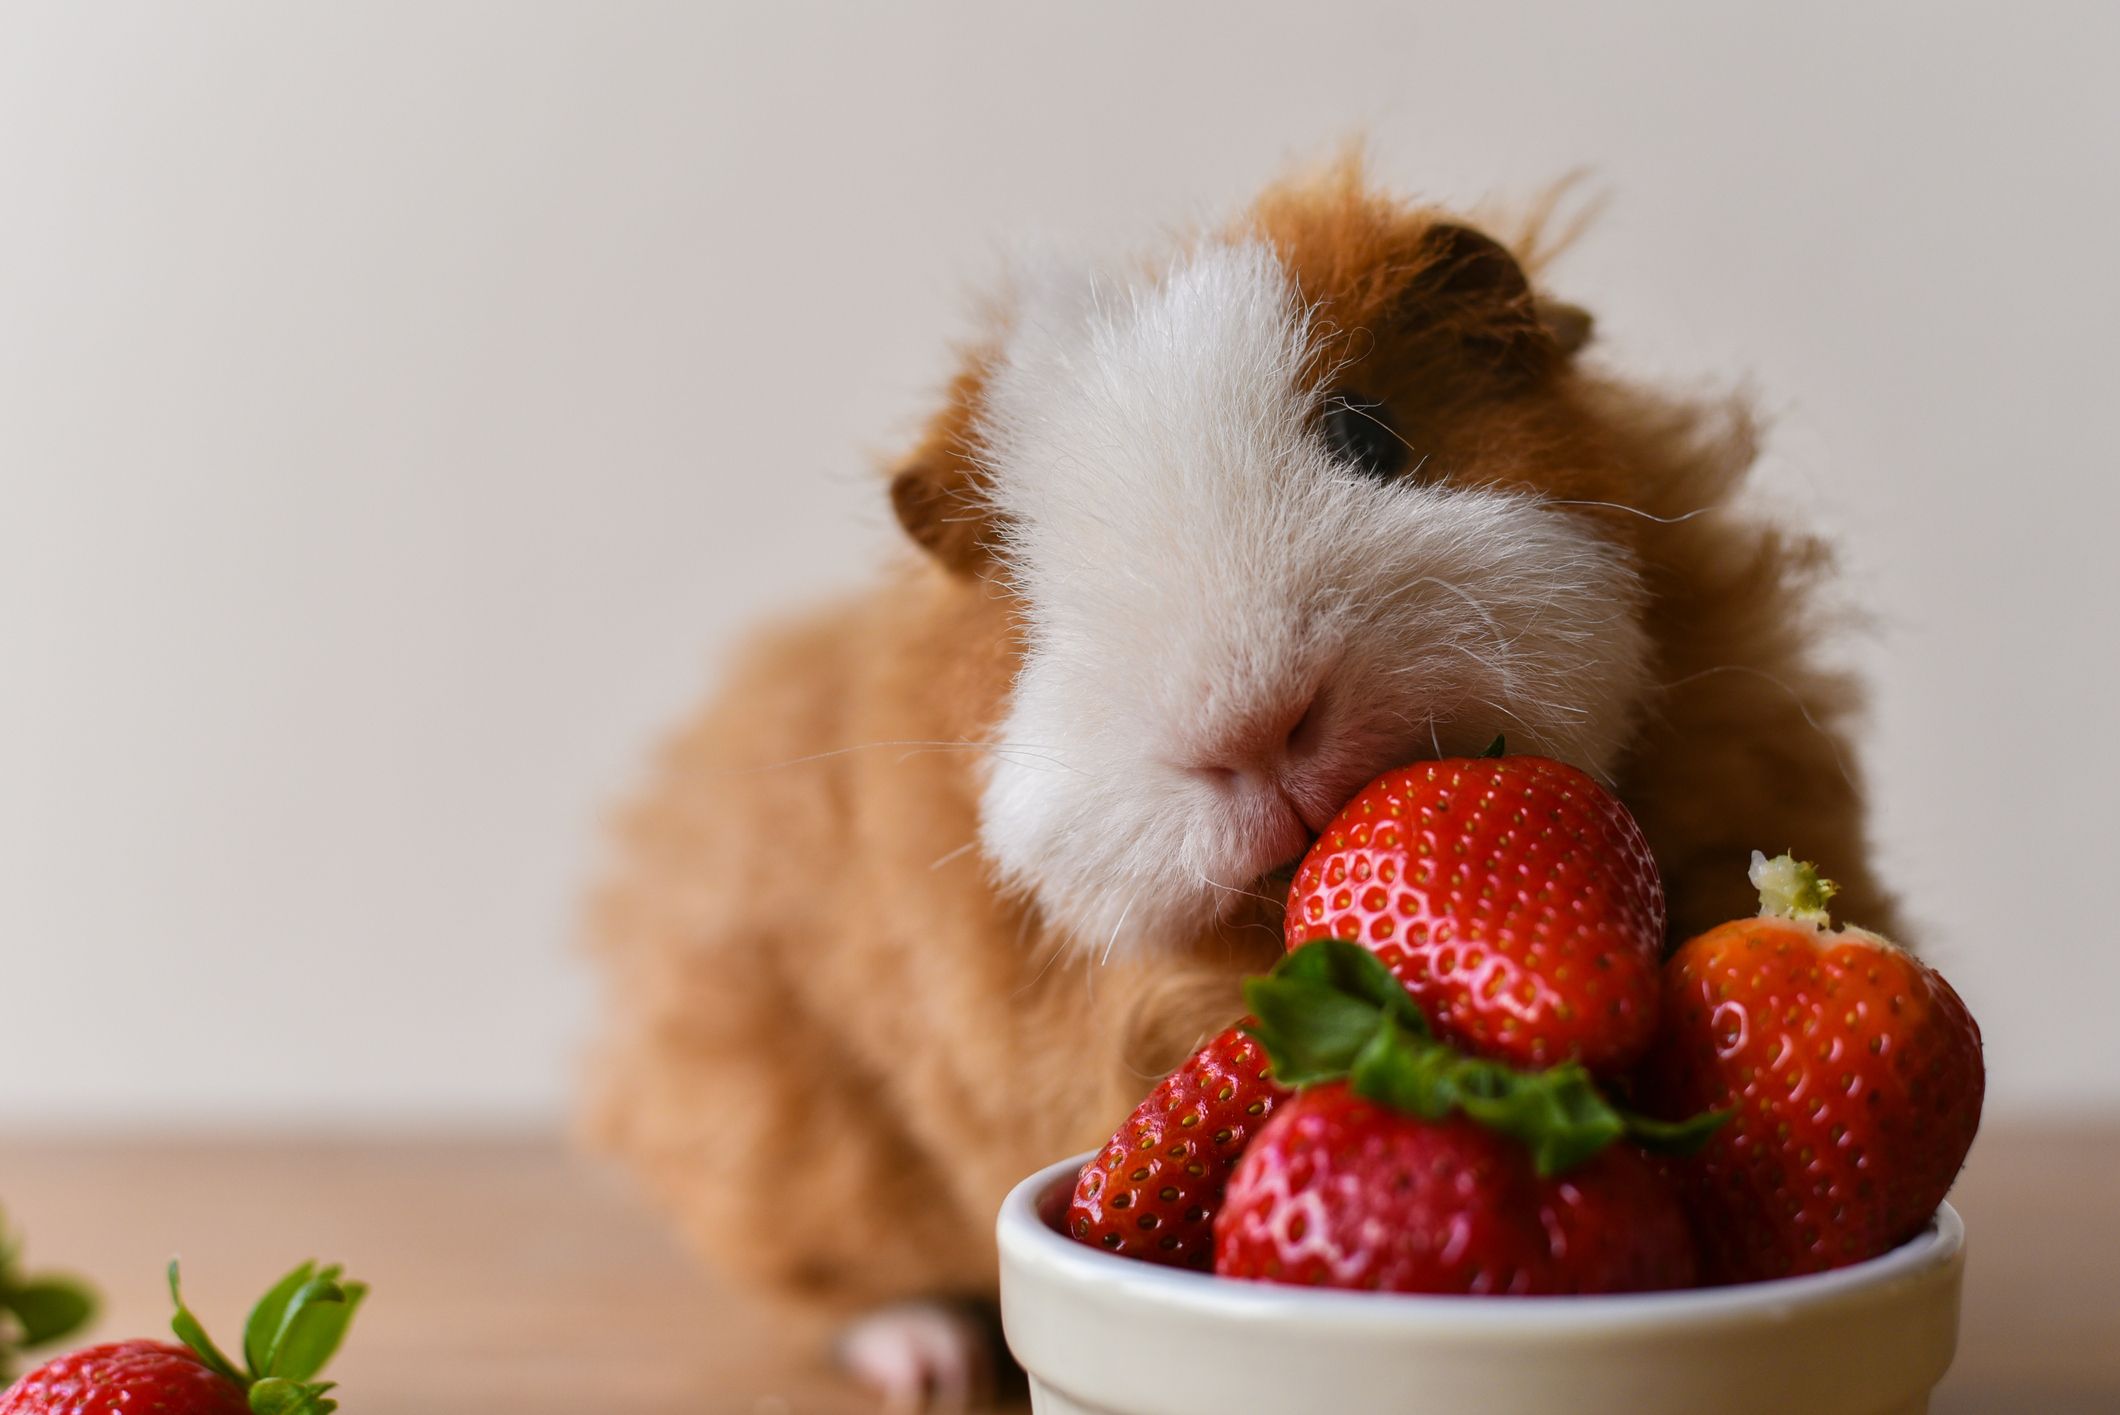 what fresh fruits and vegetables can guinea pigs eat